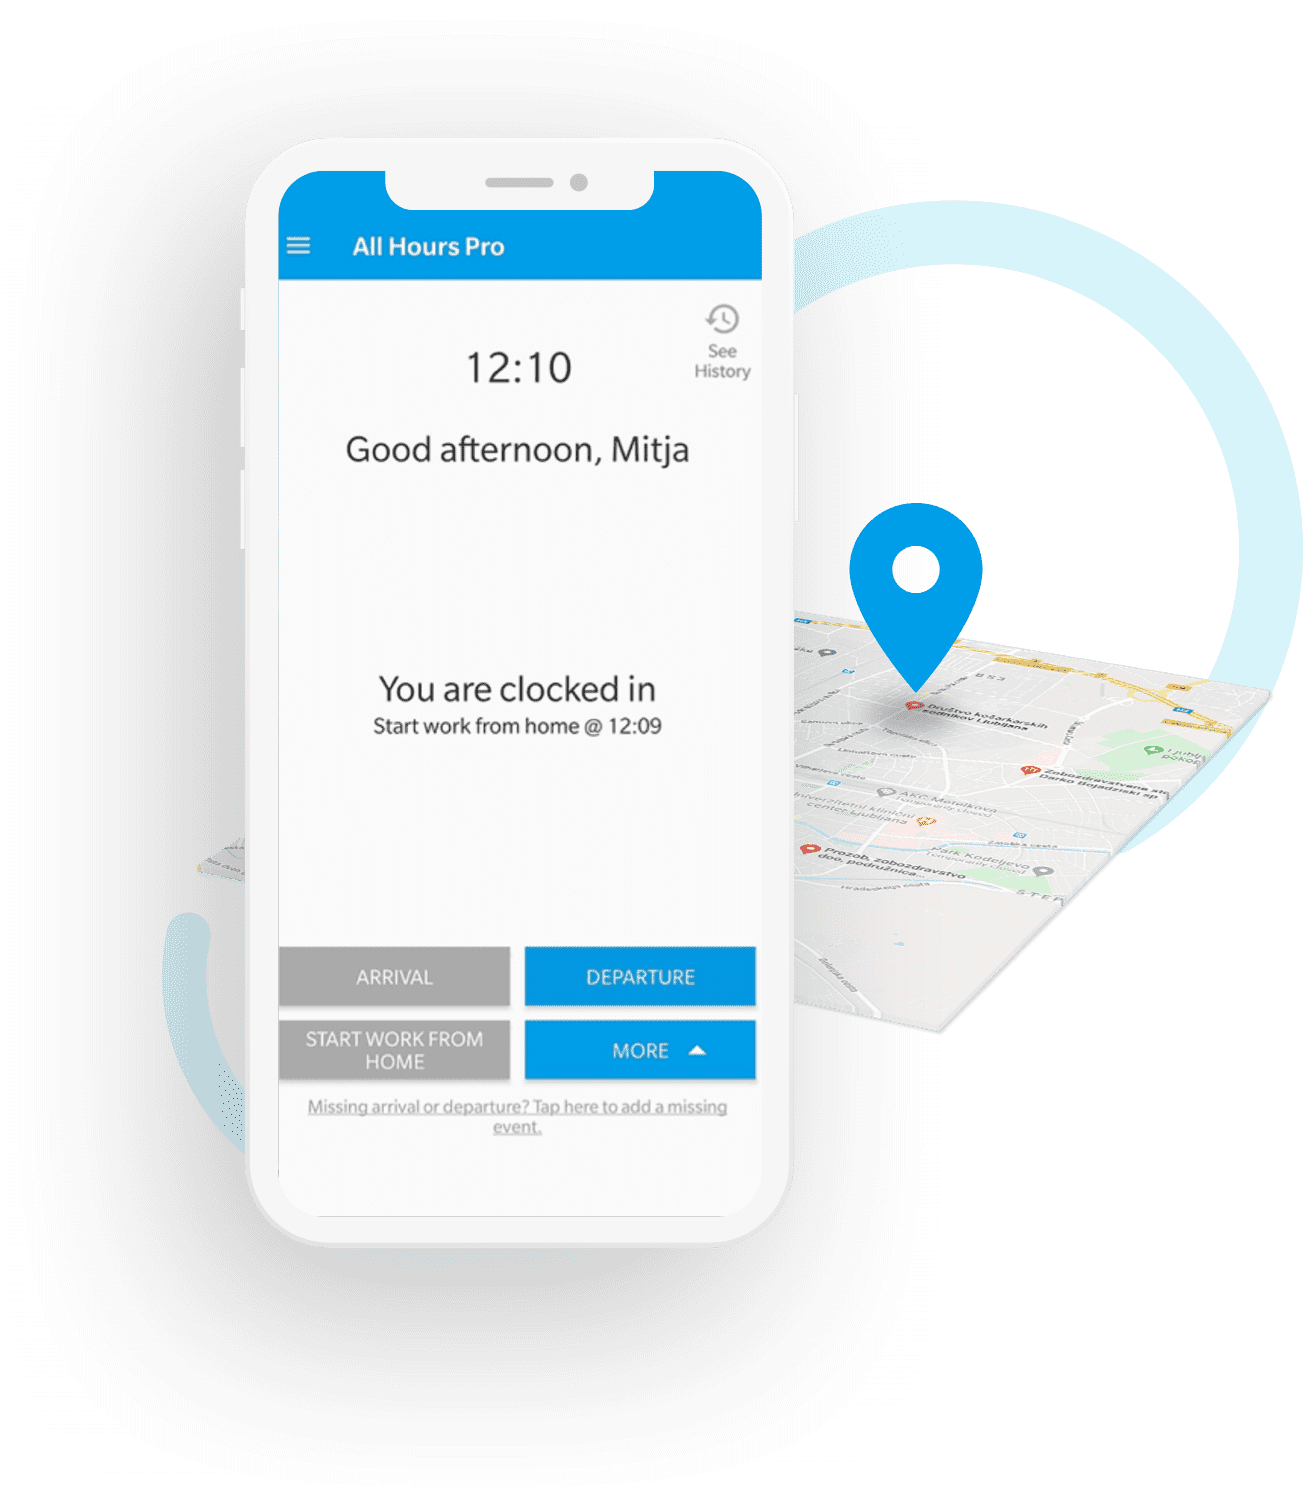 Location tracking, geofencing, Bluetooth Beacons and much more